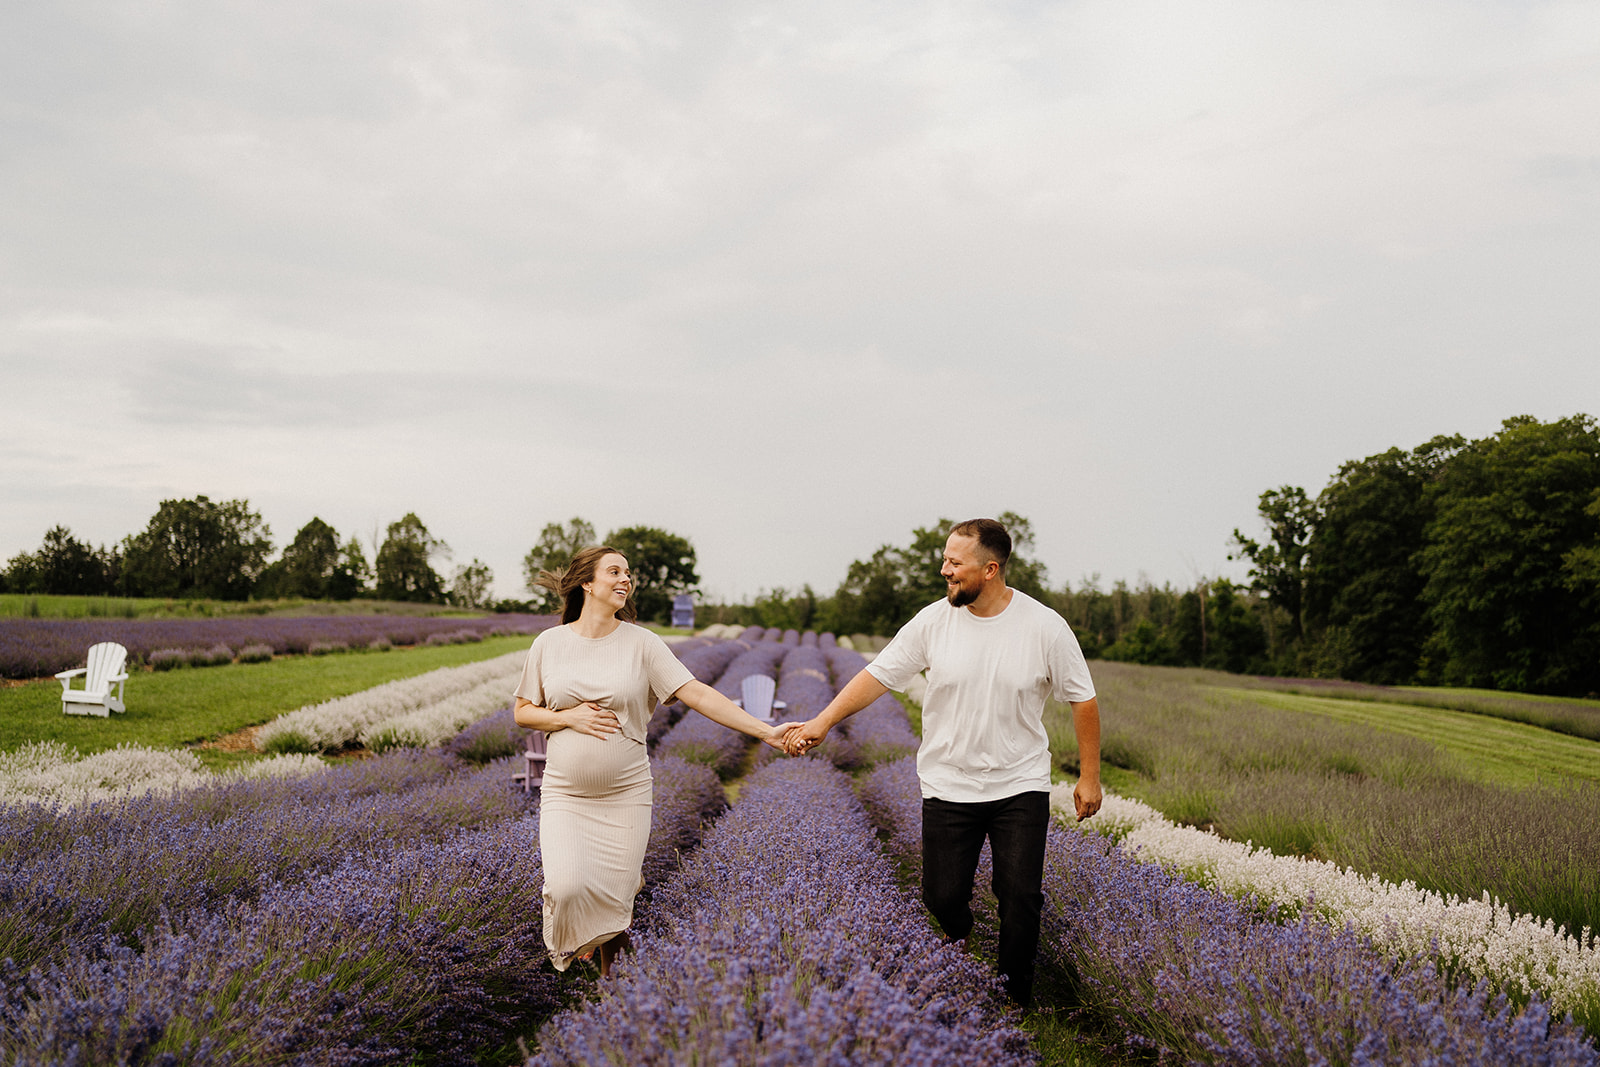 Man and woman walk in separate isles of lavender while holding hands.